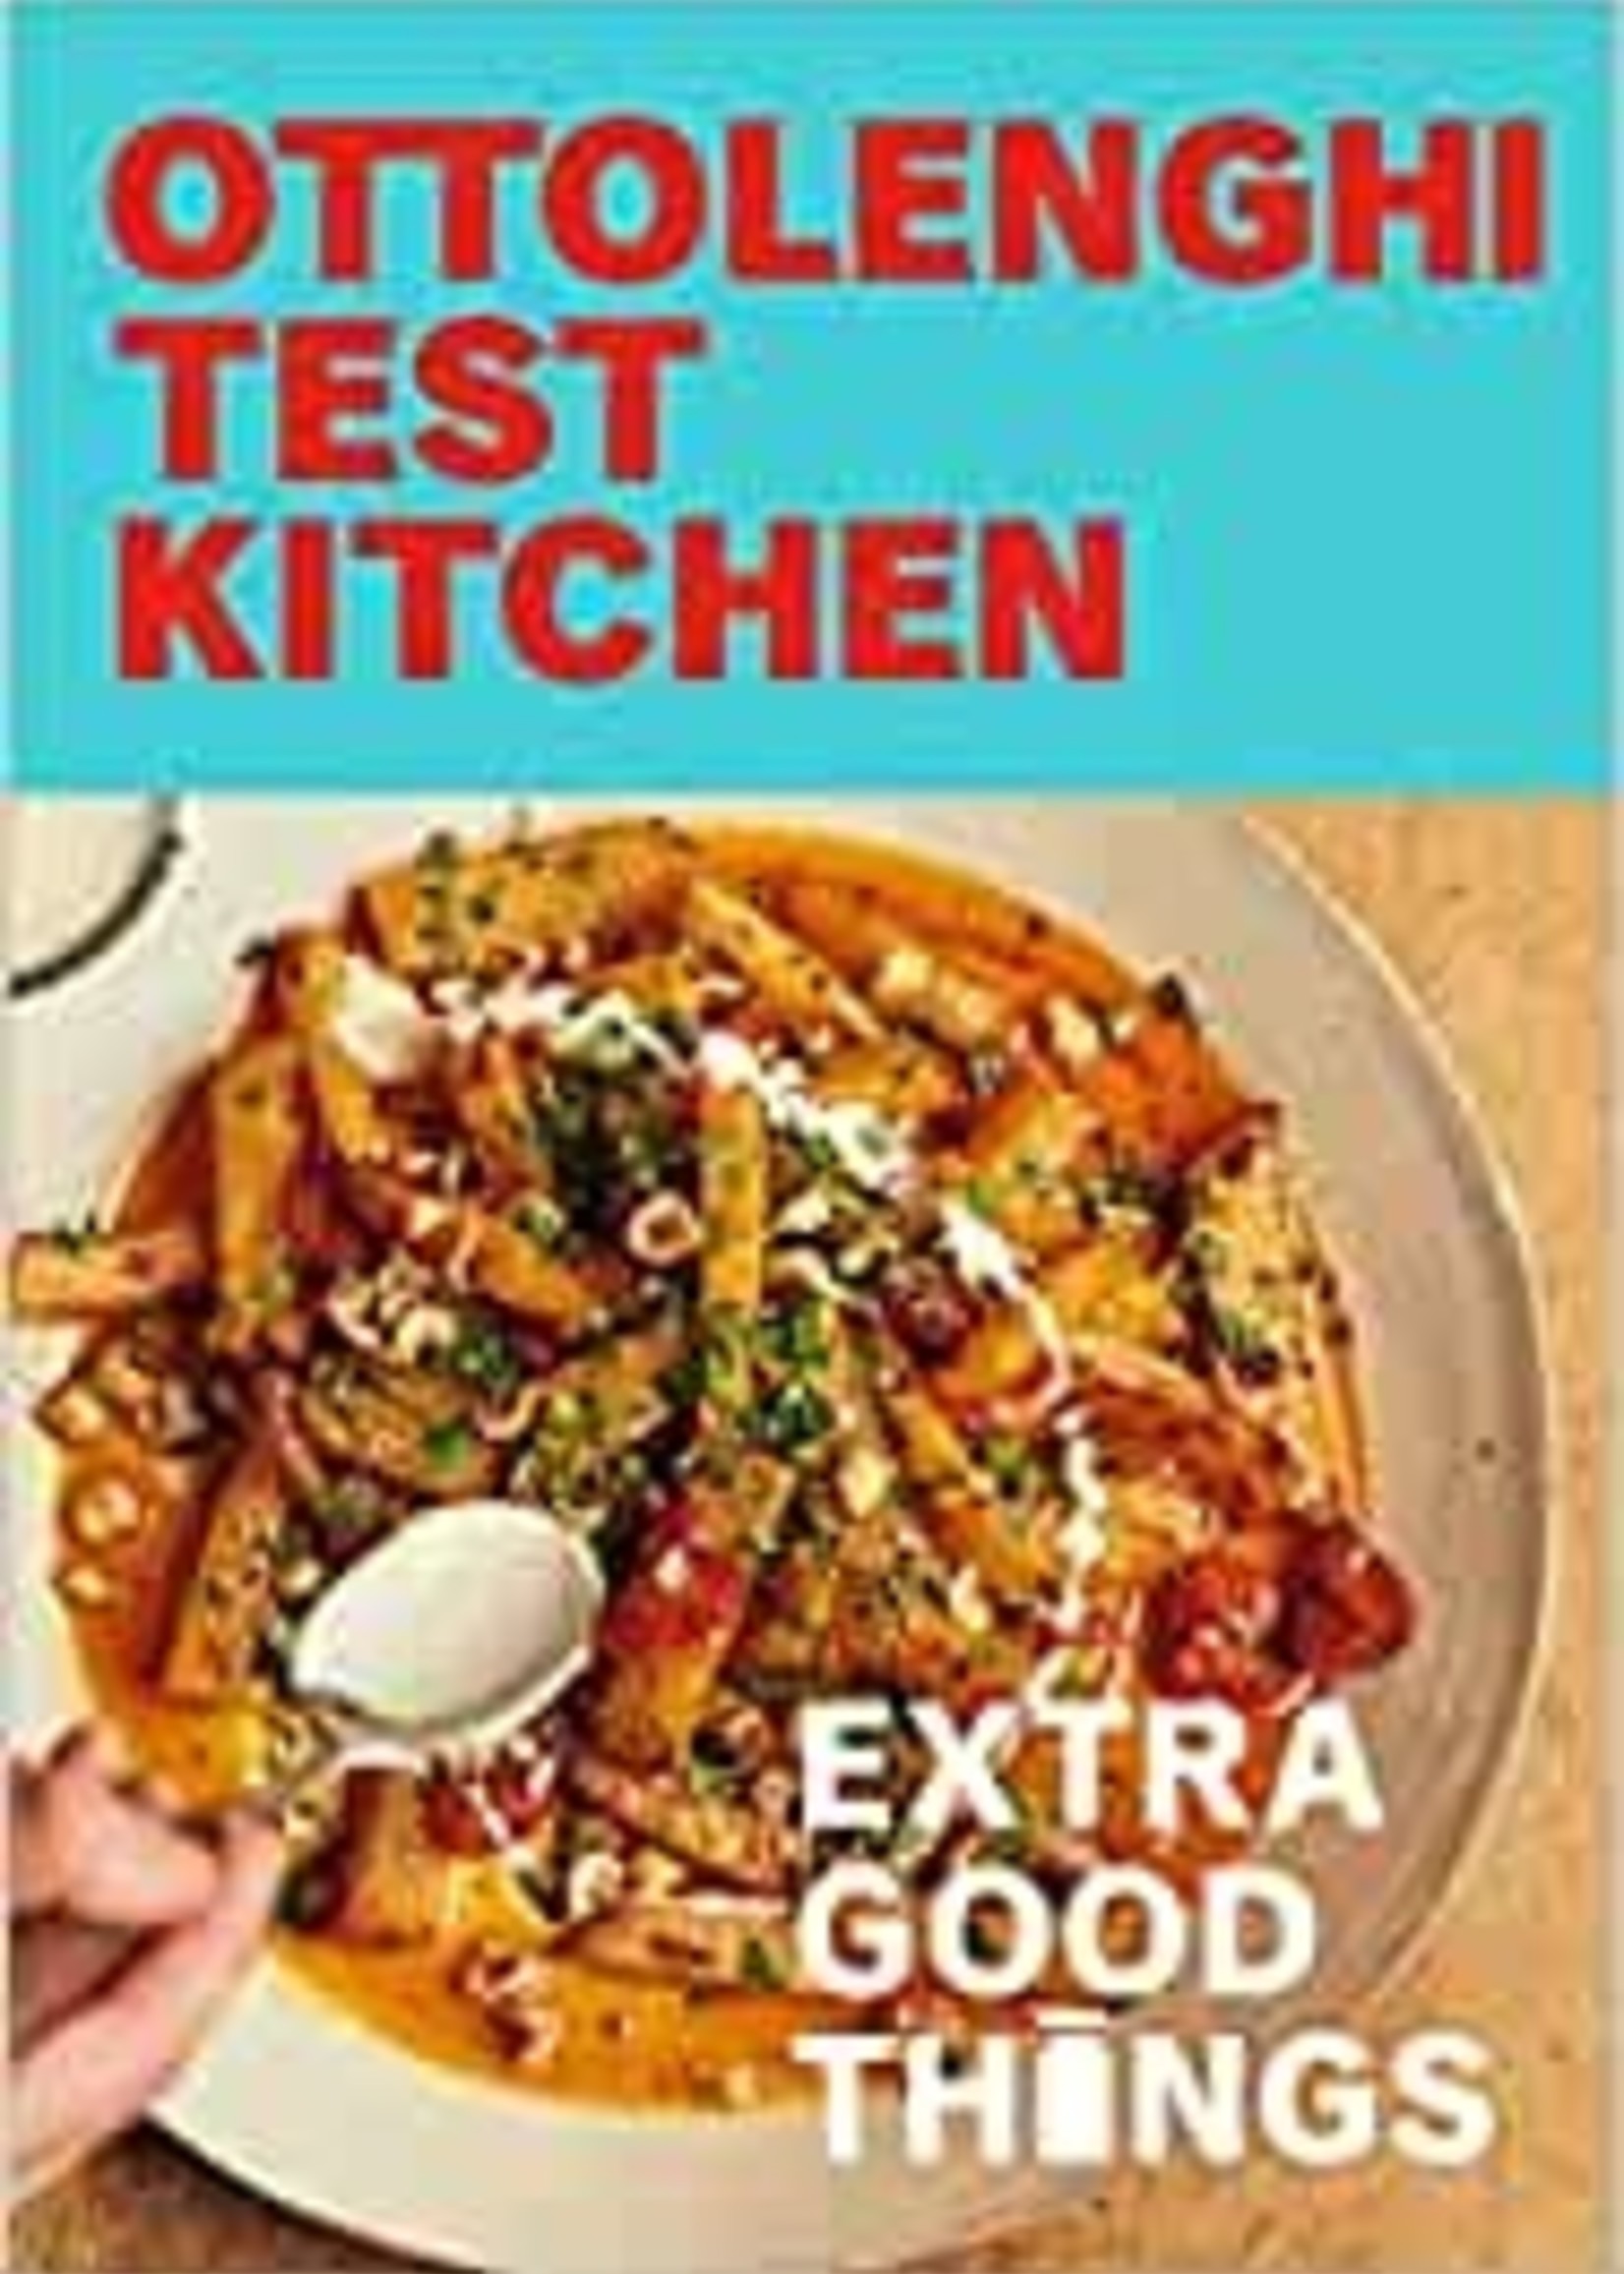 Appetite By Random House Ottolenghi Test Kitchen: Extra Good Things - Noor Murad , Yotam Ottolenghi